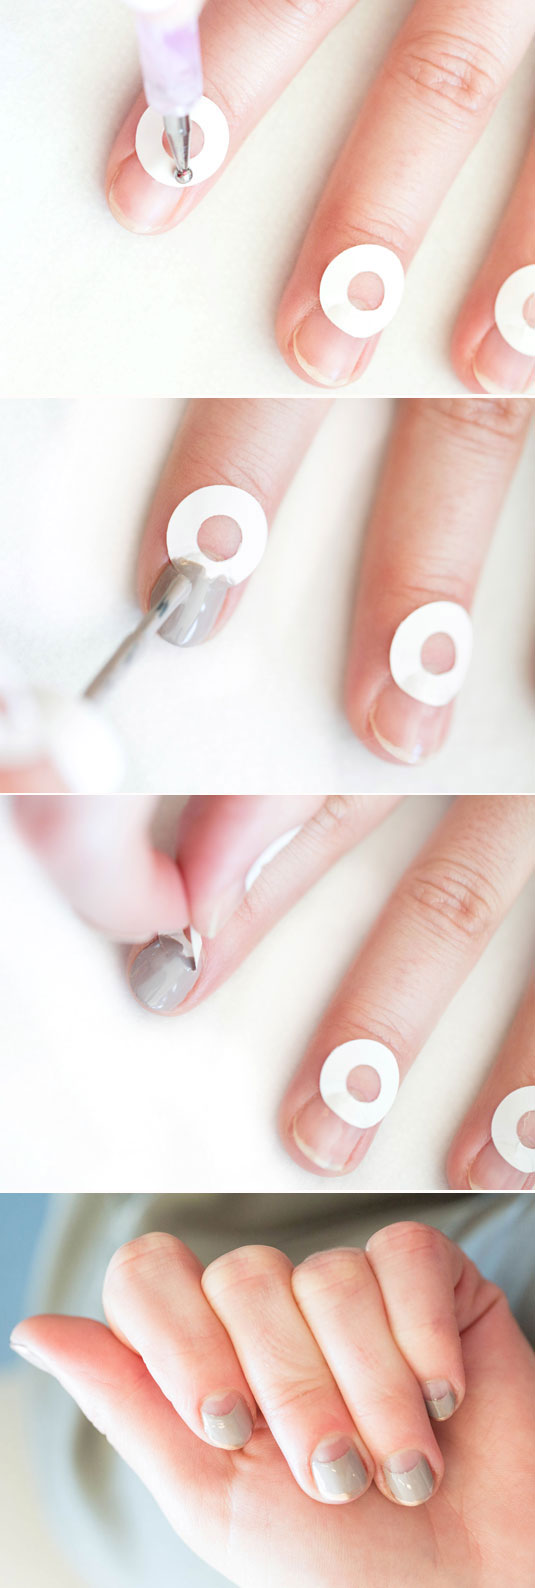 Half Moon Nail design using hole punch reinforcement stickers